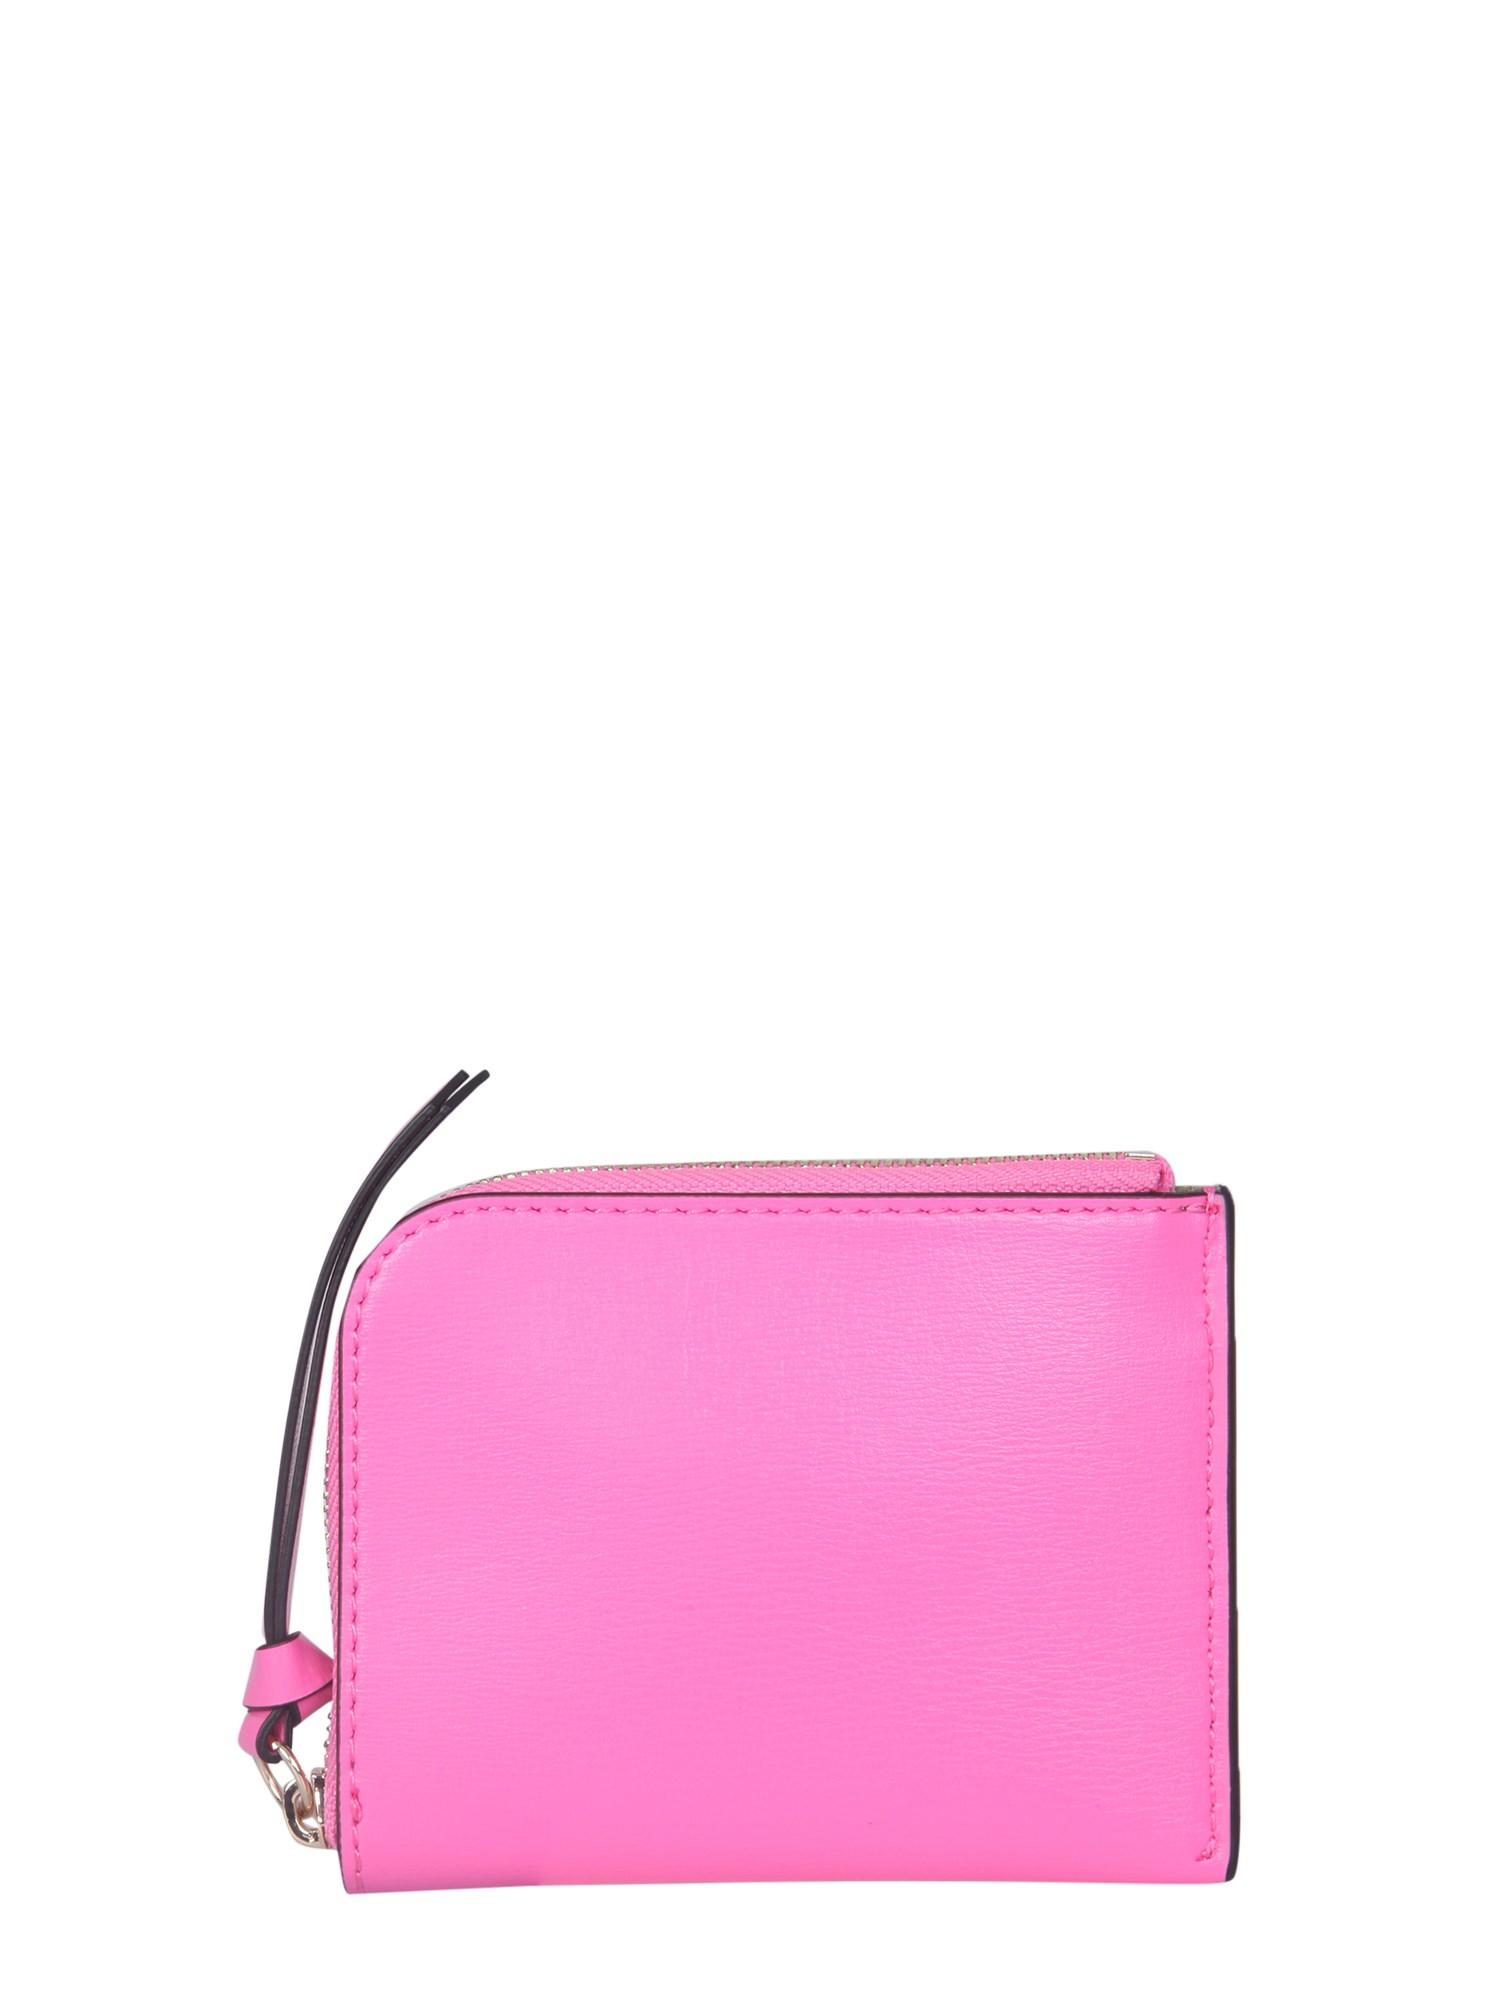 Ganni Leather Wallet in Pink | Lyst